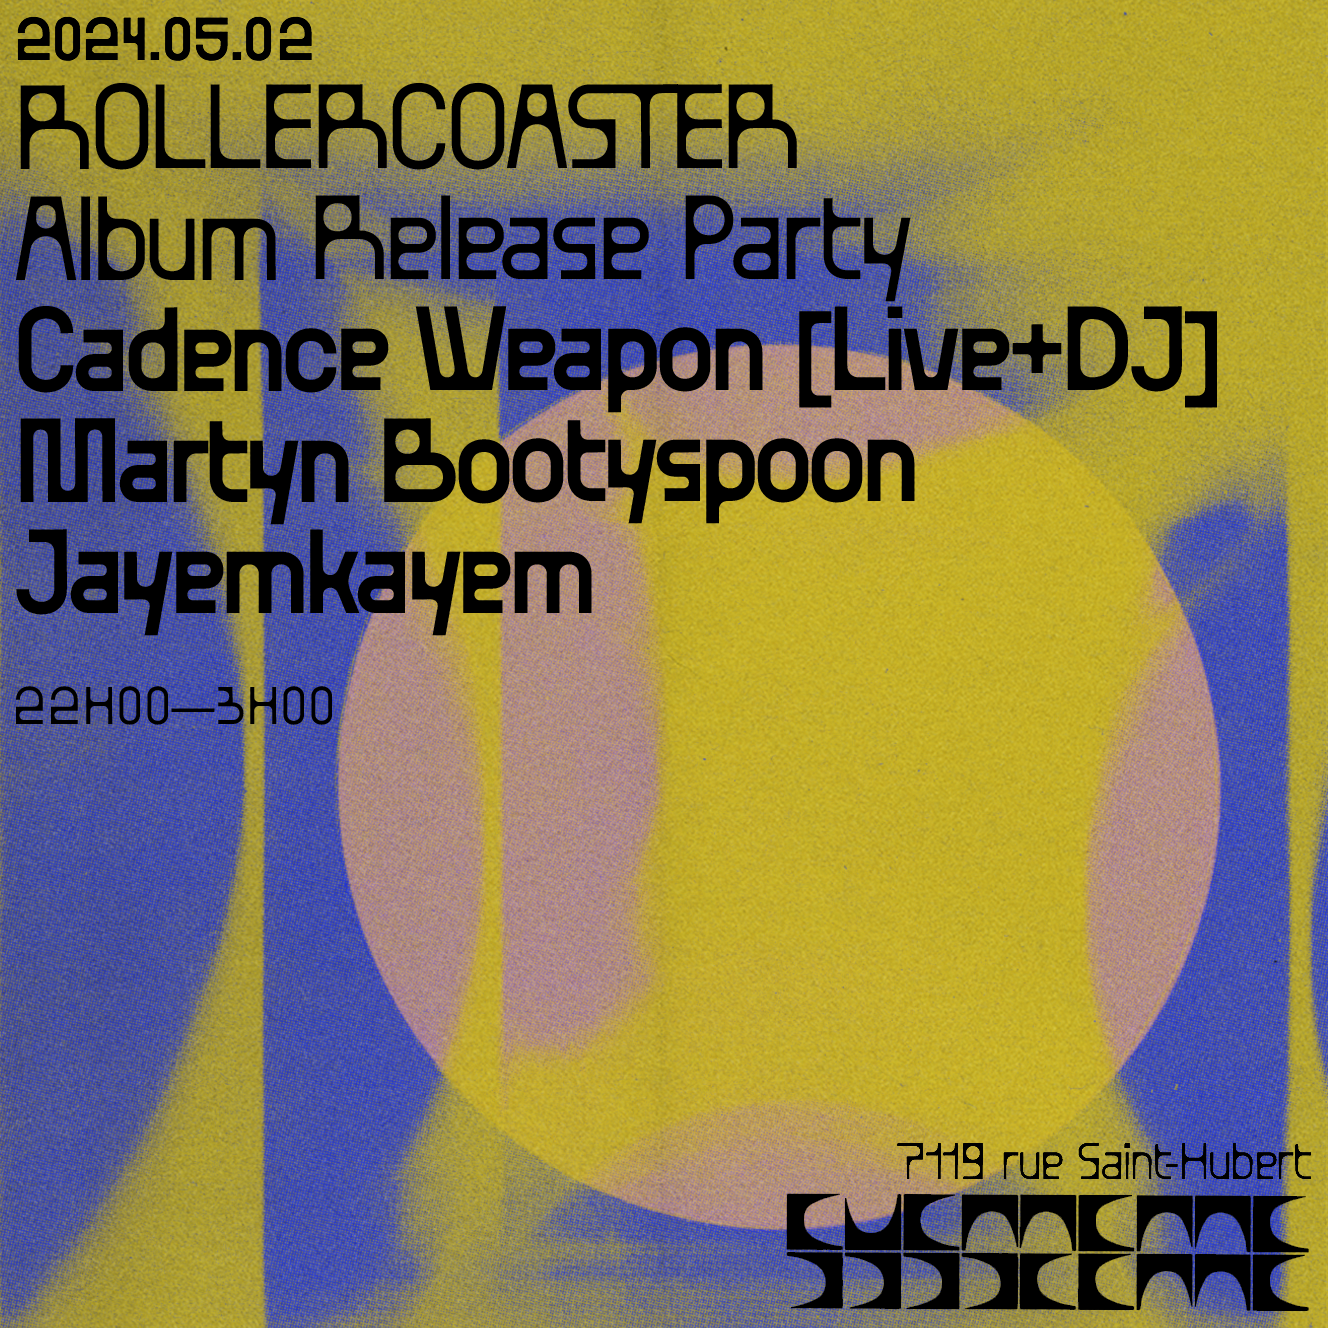 ROLLERCOASTER Album Release Party